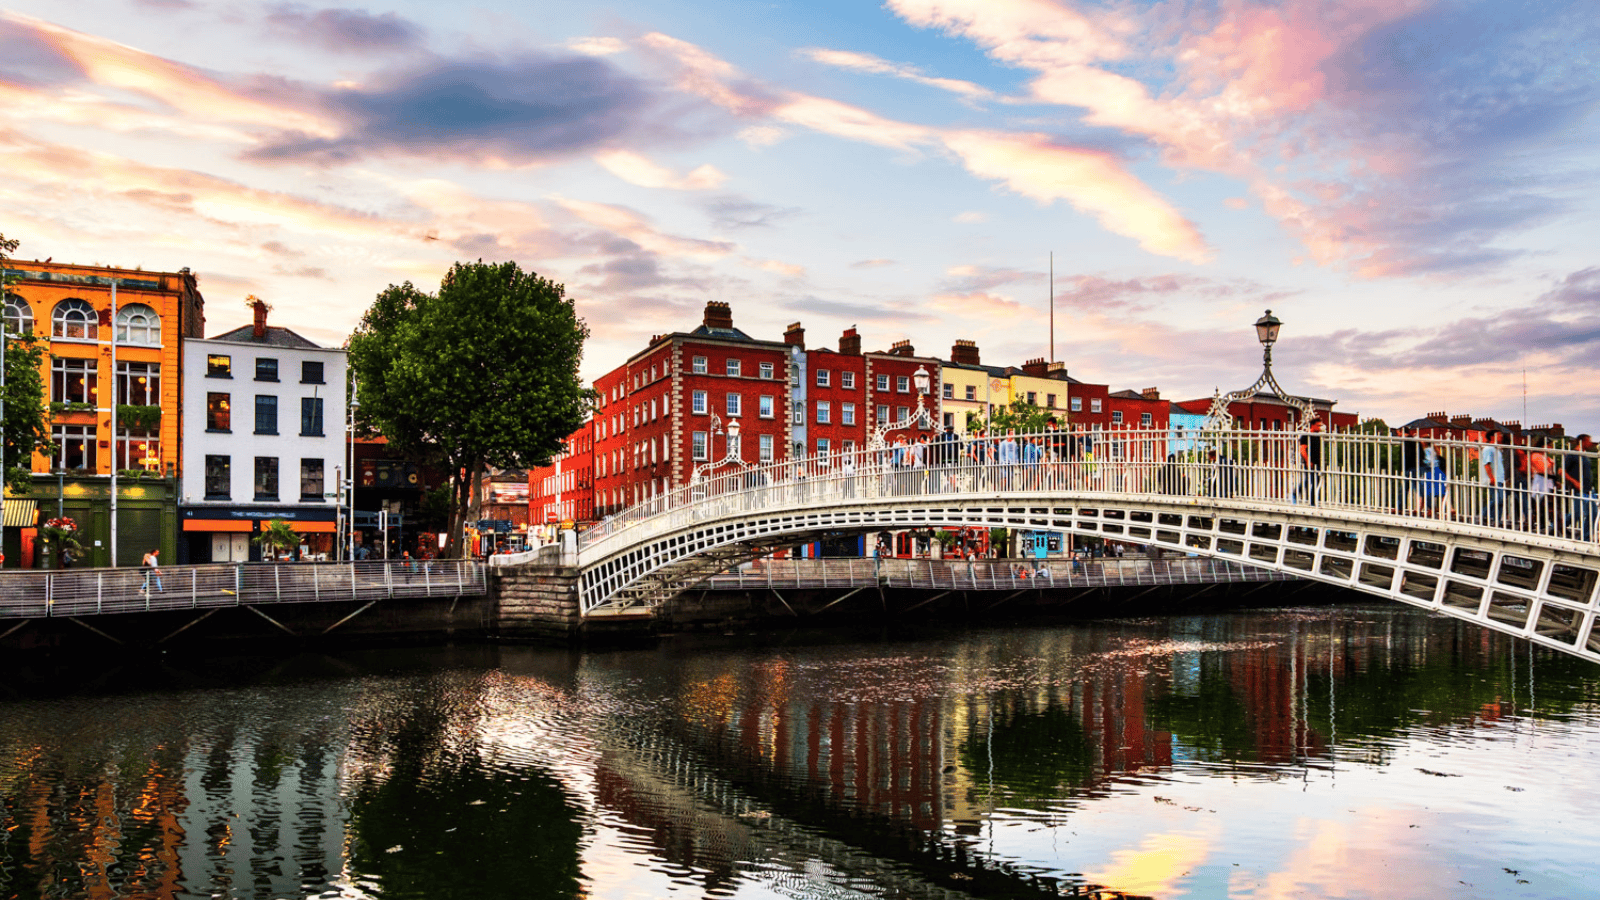 <p>While some <a href="https://whatthefab.com/top-things-to-do-in-dublin.html" rel="follow">things to do in Dublin</a> are more accessible than others, planning a trip is worthwhile. Disabled tourists can explore places like Trinity College and Dublin Castle. Dublin’s cobblestone streets may be challenging for visitors with limited mobility, but most areas are wheelchair-friendly. </p><p>Many Dublin establishments provide mobility accommodations such as entrance and bathroom ramps. The city also has a straightforward public transportation system with accessibility features.</p>